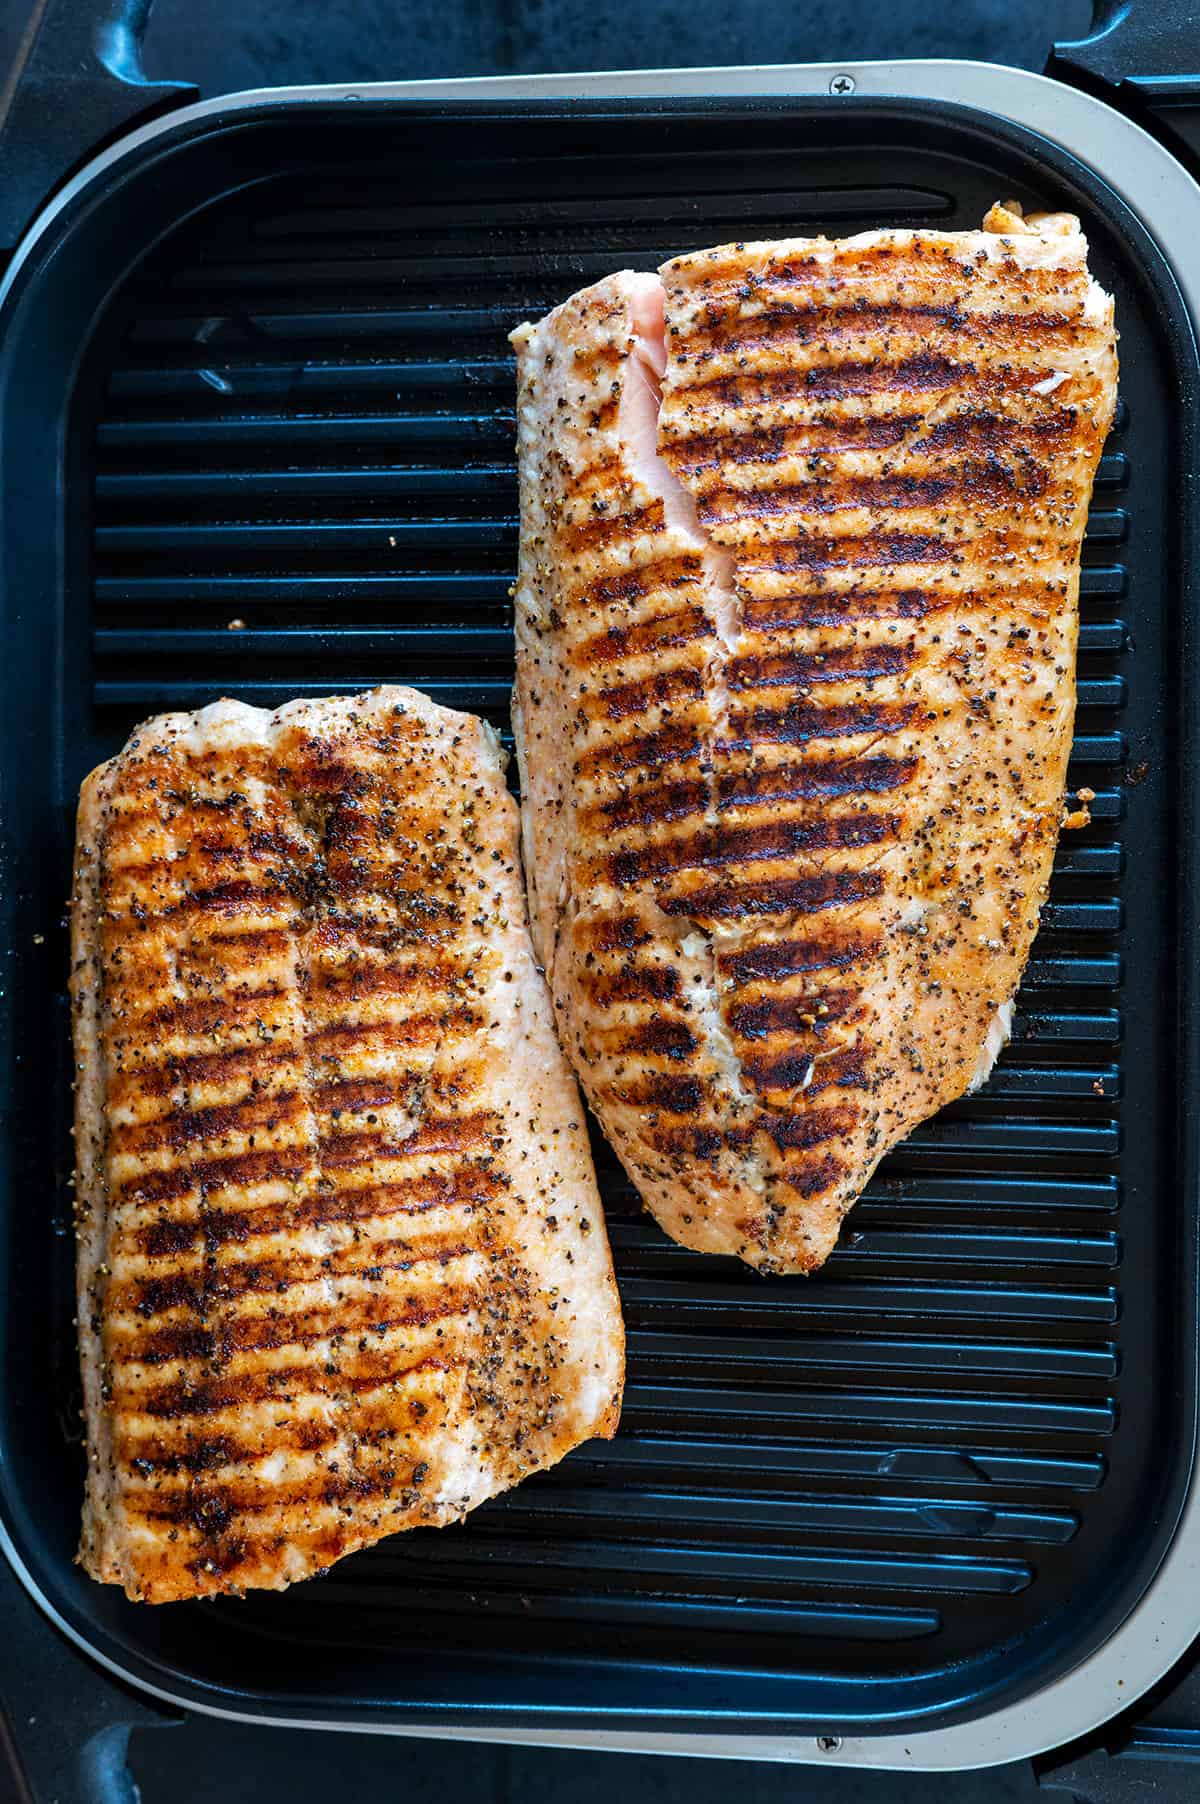 salmon on grill skin side down.